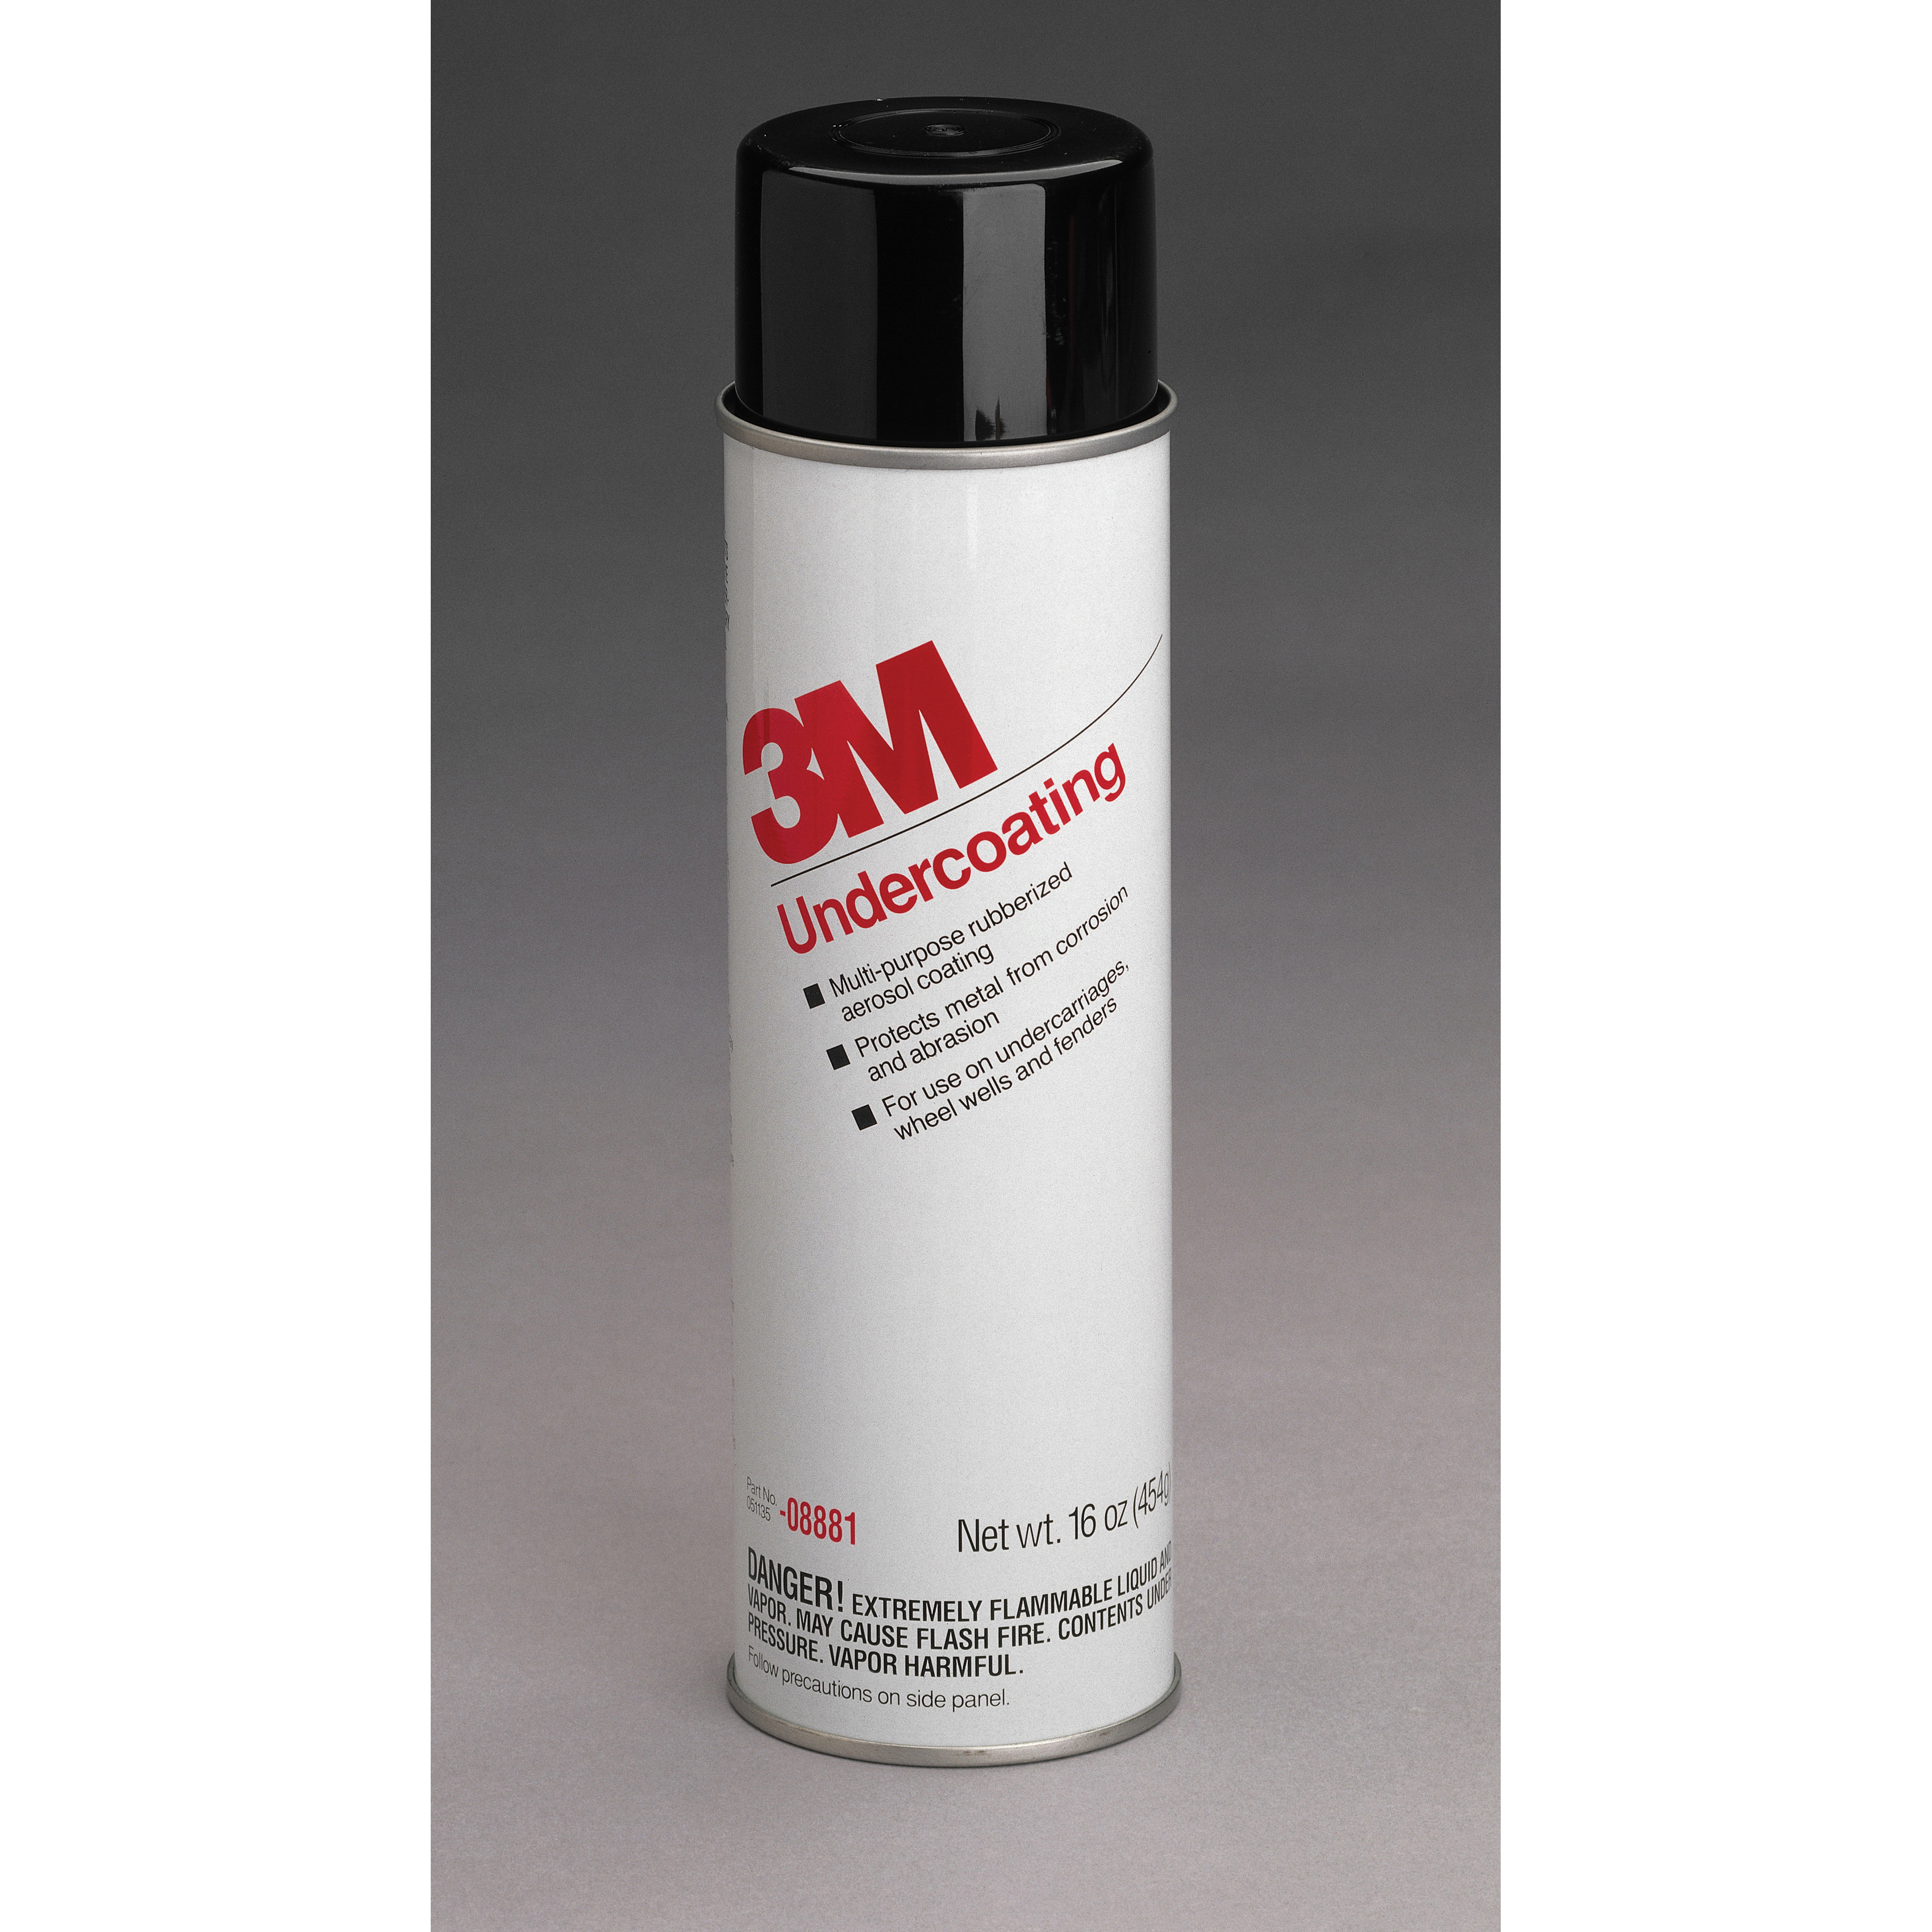 3M™ 051135-08881 Paintable Undercoating, 16 oz Container, Liquid Form, Black, 20 min Curing